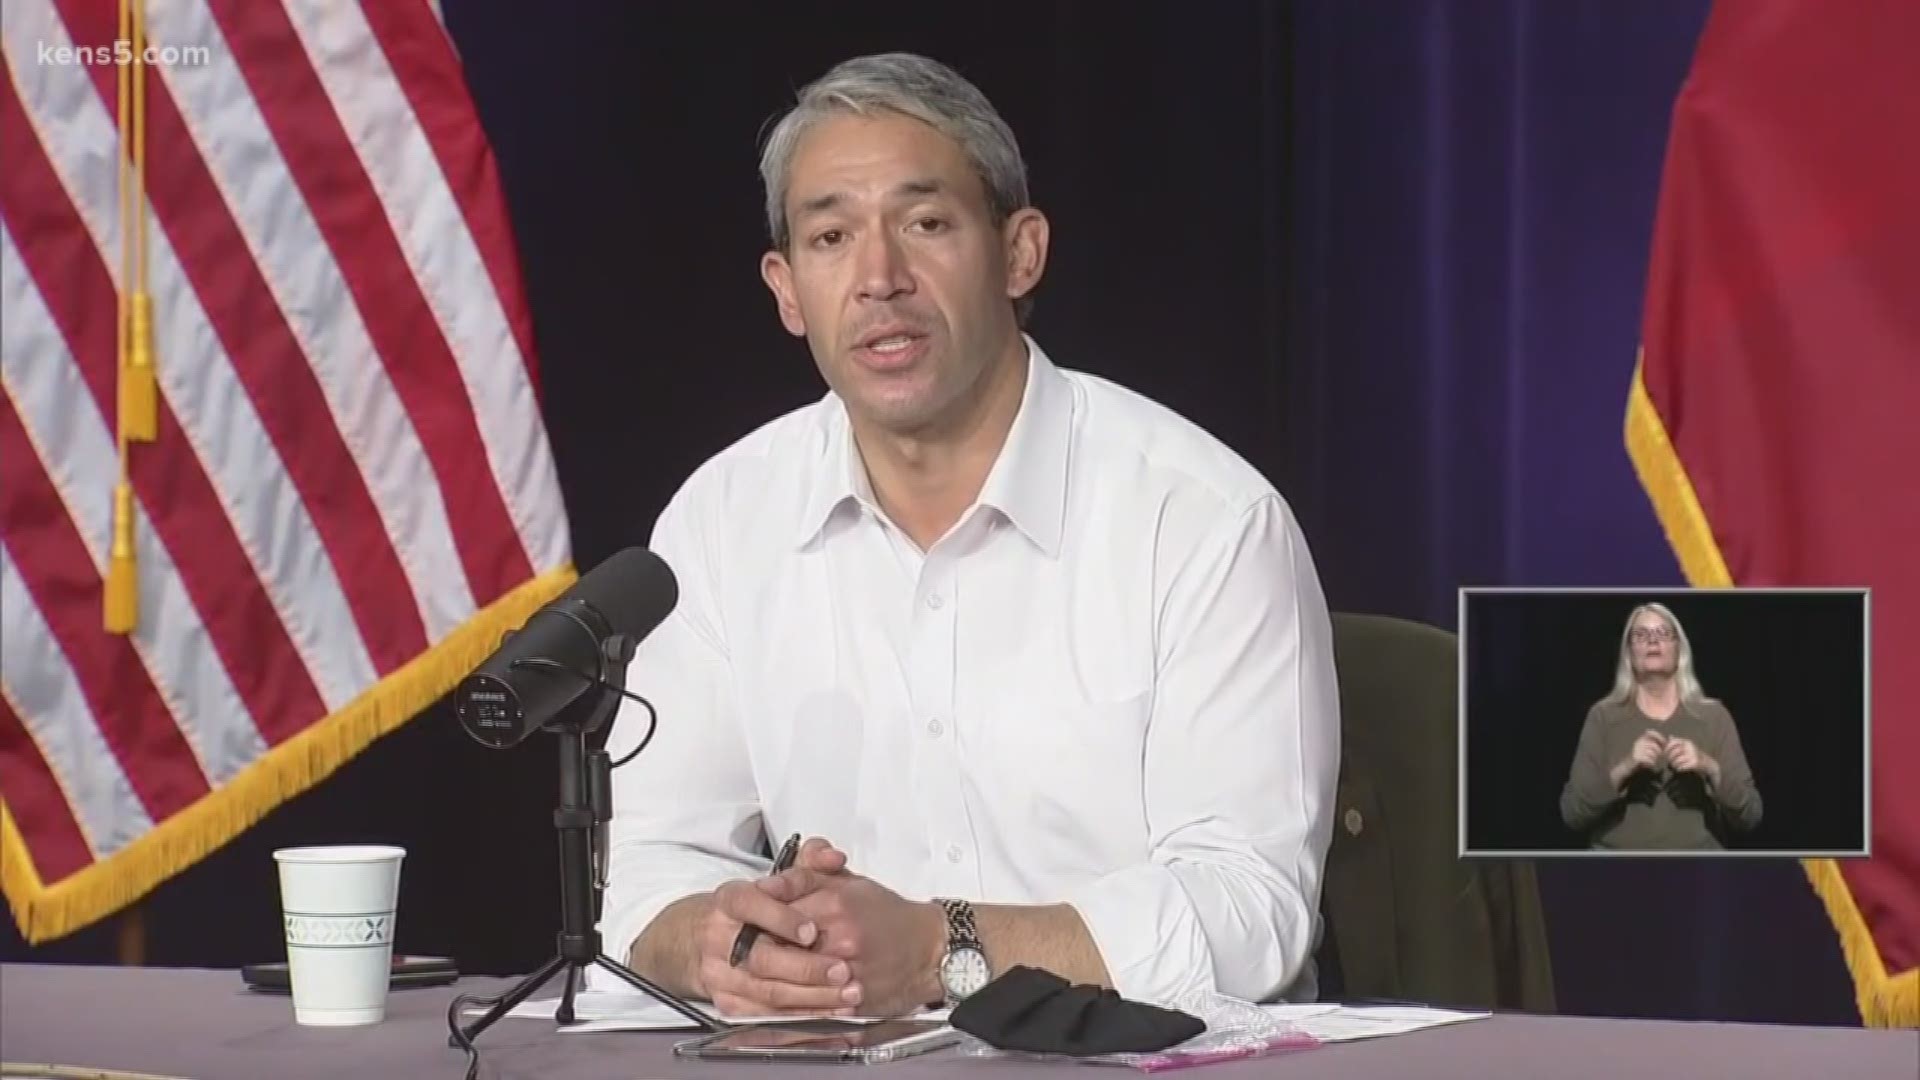 According to Mayor Nirenberg, there are now 1,195 confirmed coronavirus cases in Bexar County with no new deaths to report on Friday.